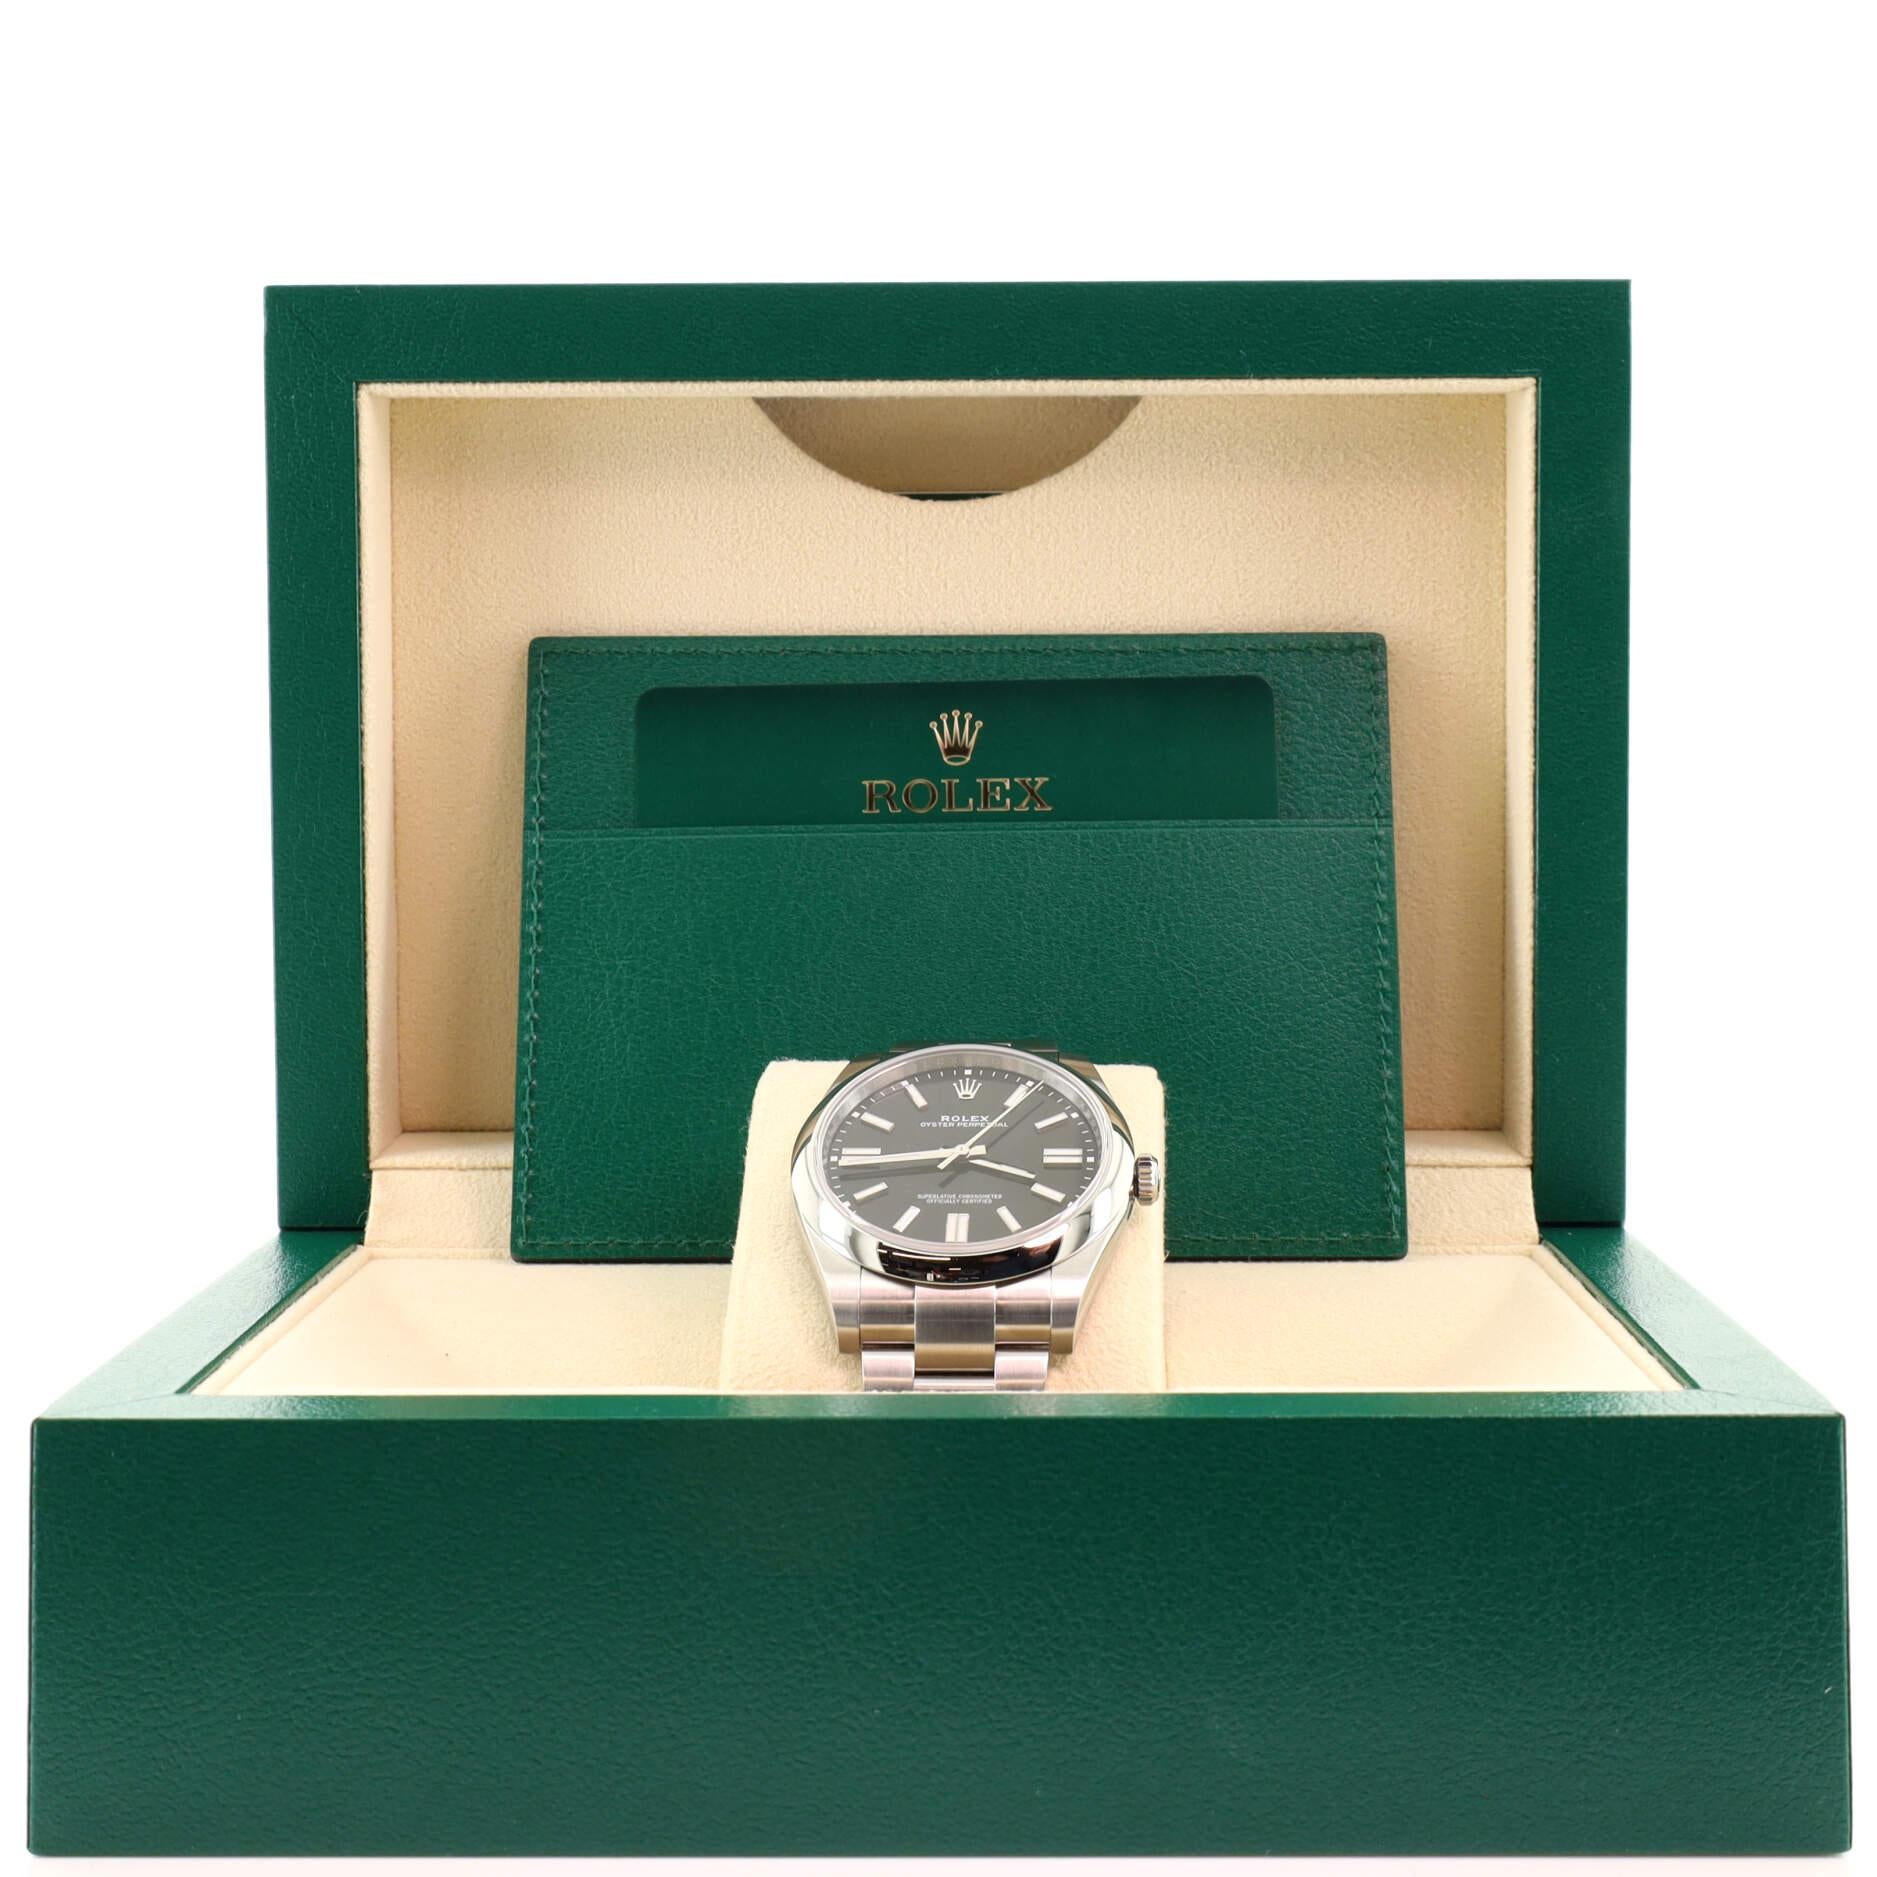 Condition: Excellent. Minor wear throughout case and bracelet.
Accessories: Box, Instruction Booklet, Warranty Card - Dated
Measurements: Case Size/Width: 41mm, Watch Height: 12mm, Band Width: 21mm, Wrist circumference: 6.25